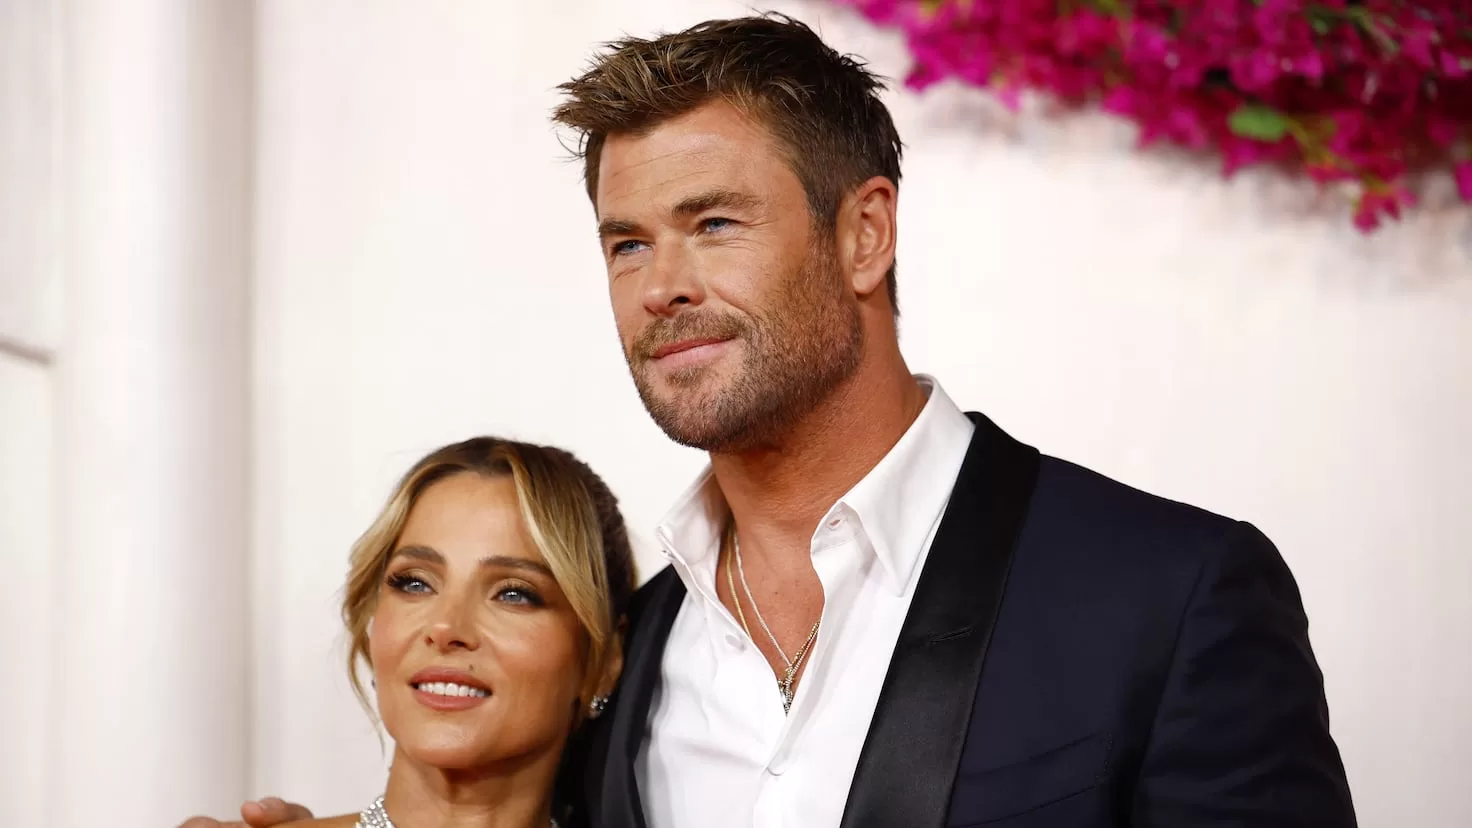 Elsa Pataky and Chris Hemsworth make a surprise appearance at the Oscars
